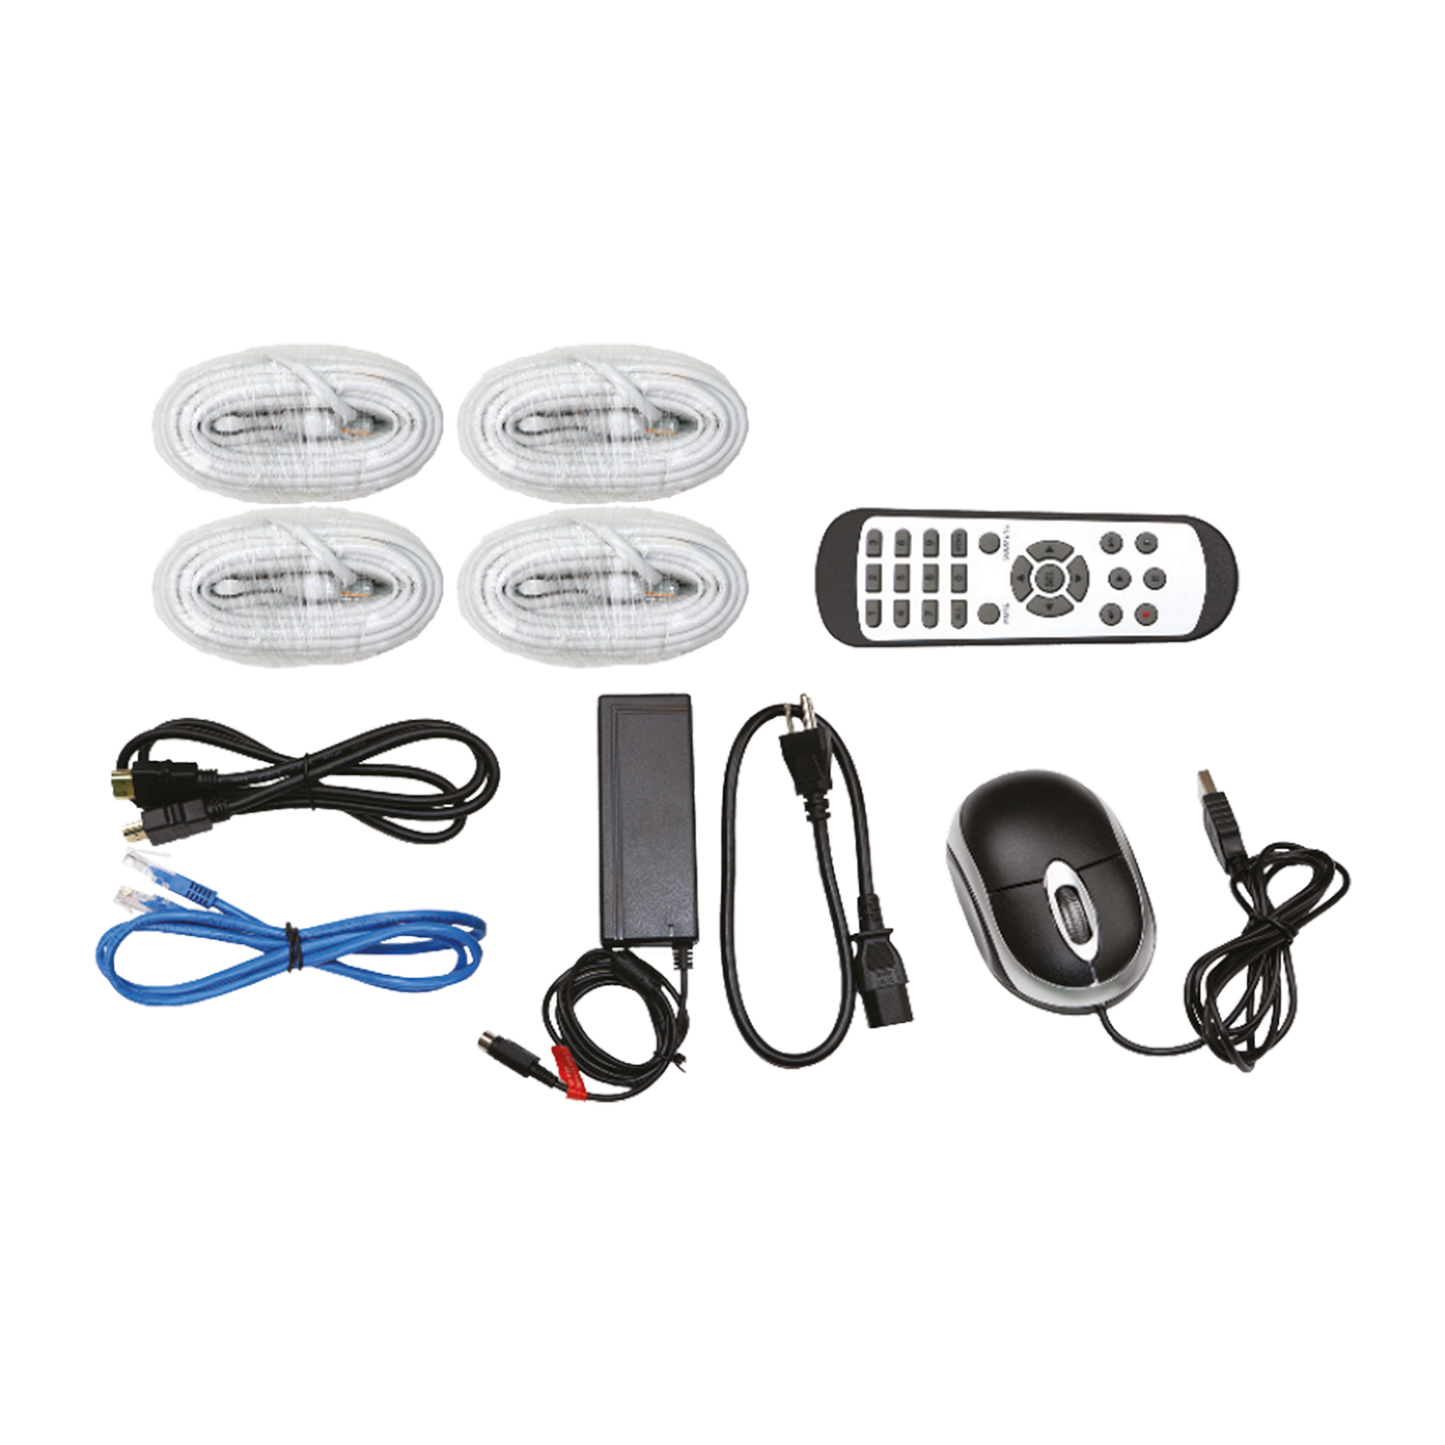 4 Channel Surveillance Kit with Four 5MP IP Cameras, 1TB